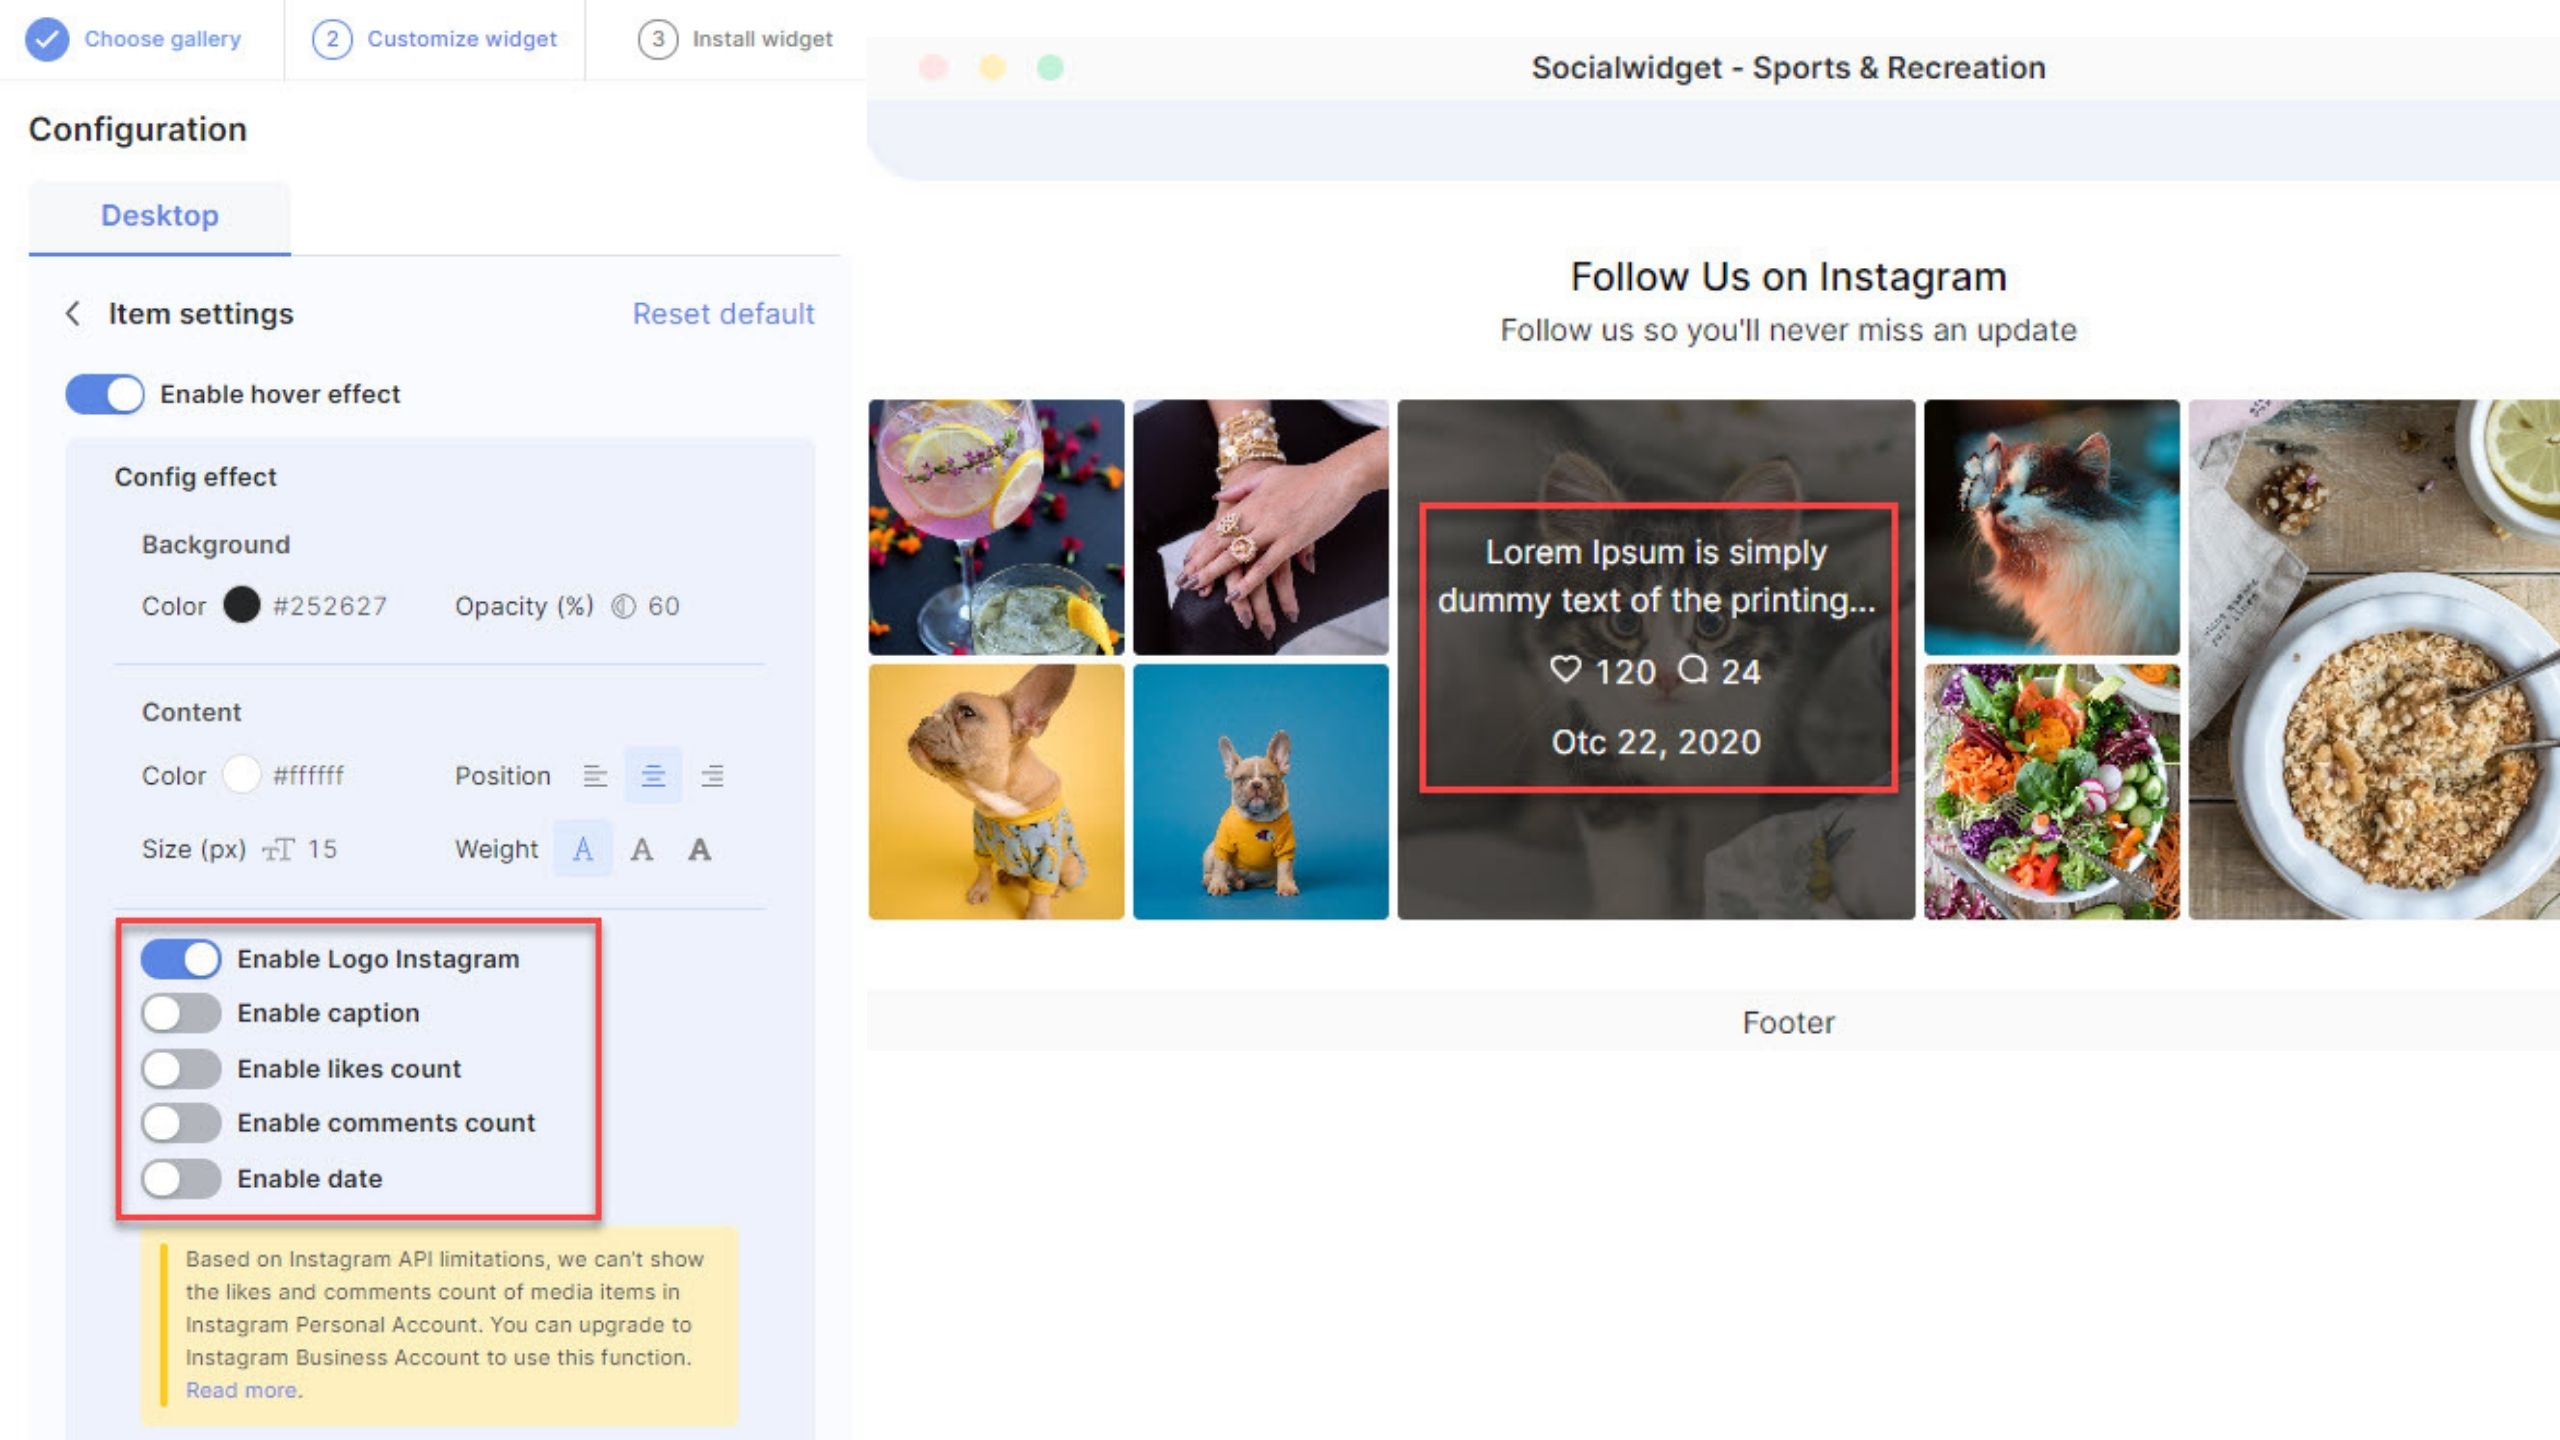 Users can turn on/off the Instagram Icons anytime they want - Socialwidget v2.1